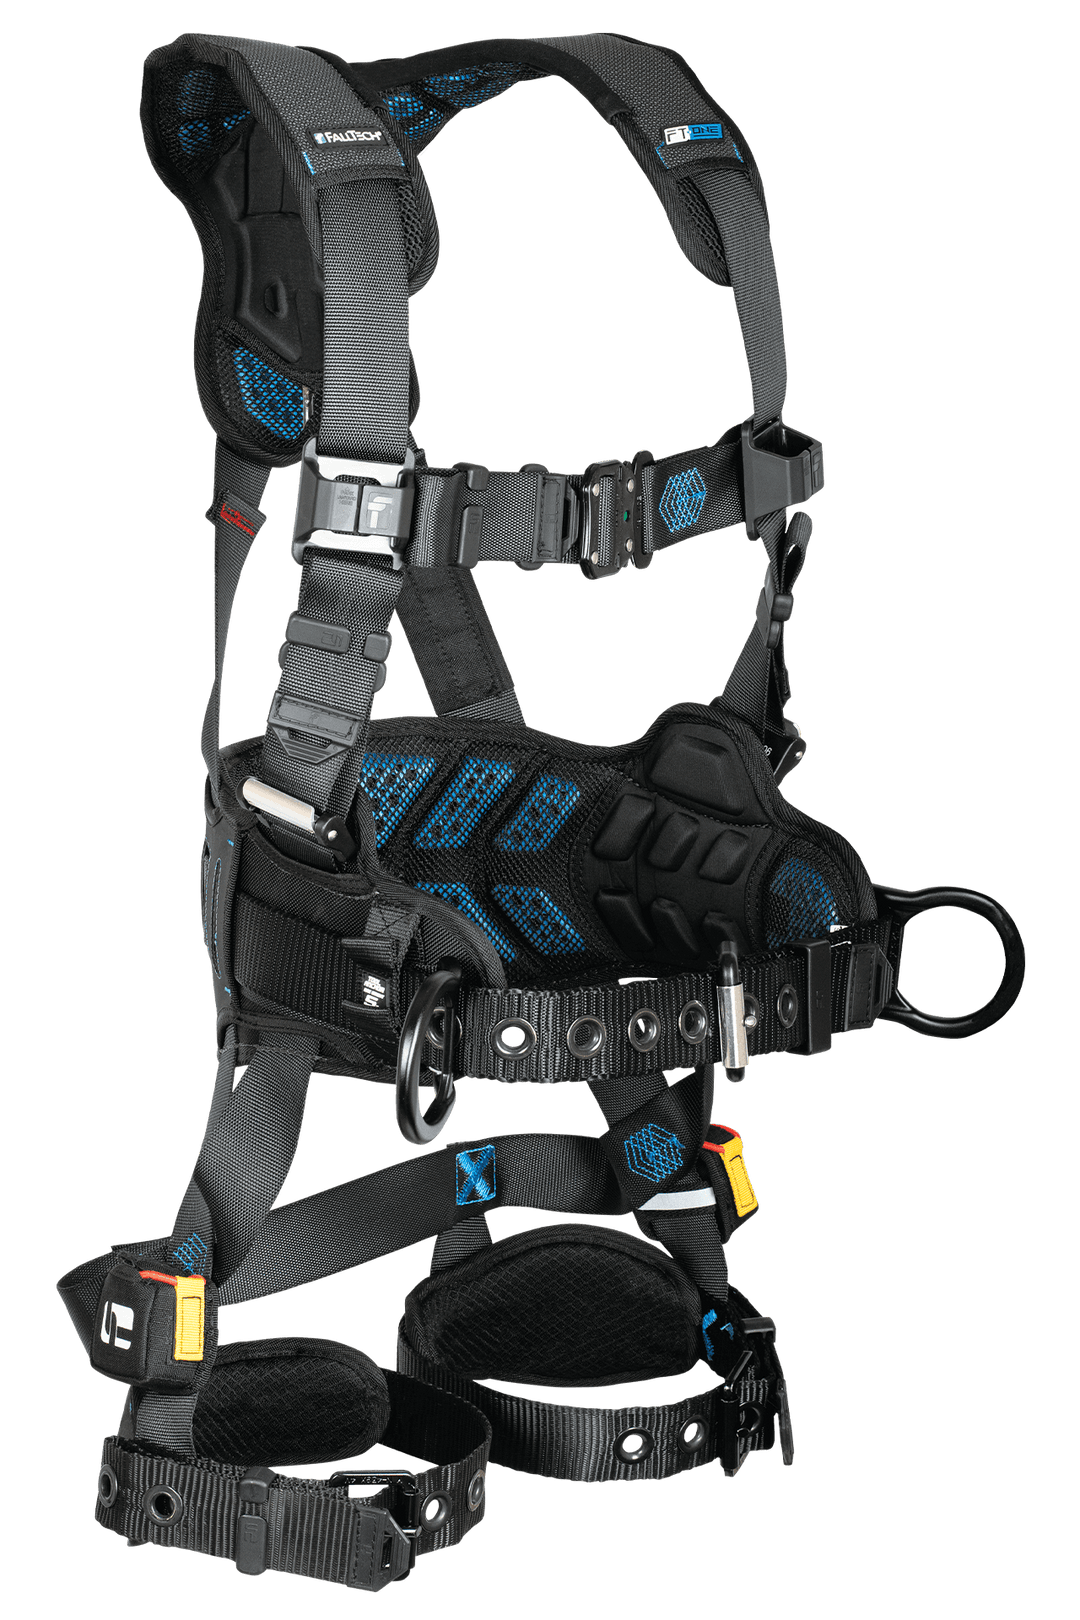 FALLTECH FT-ONE™ 3D Construction Belted Full Body Harness, Tongue Buckle Leg Adjustments